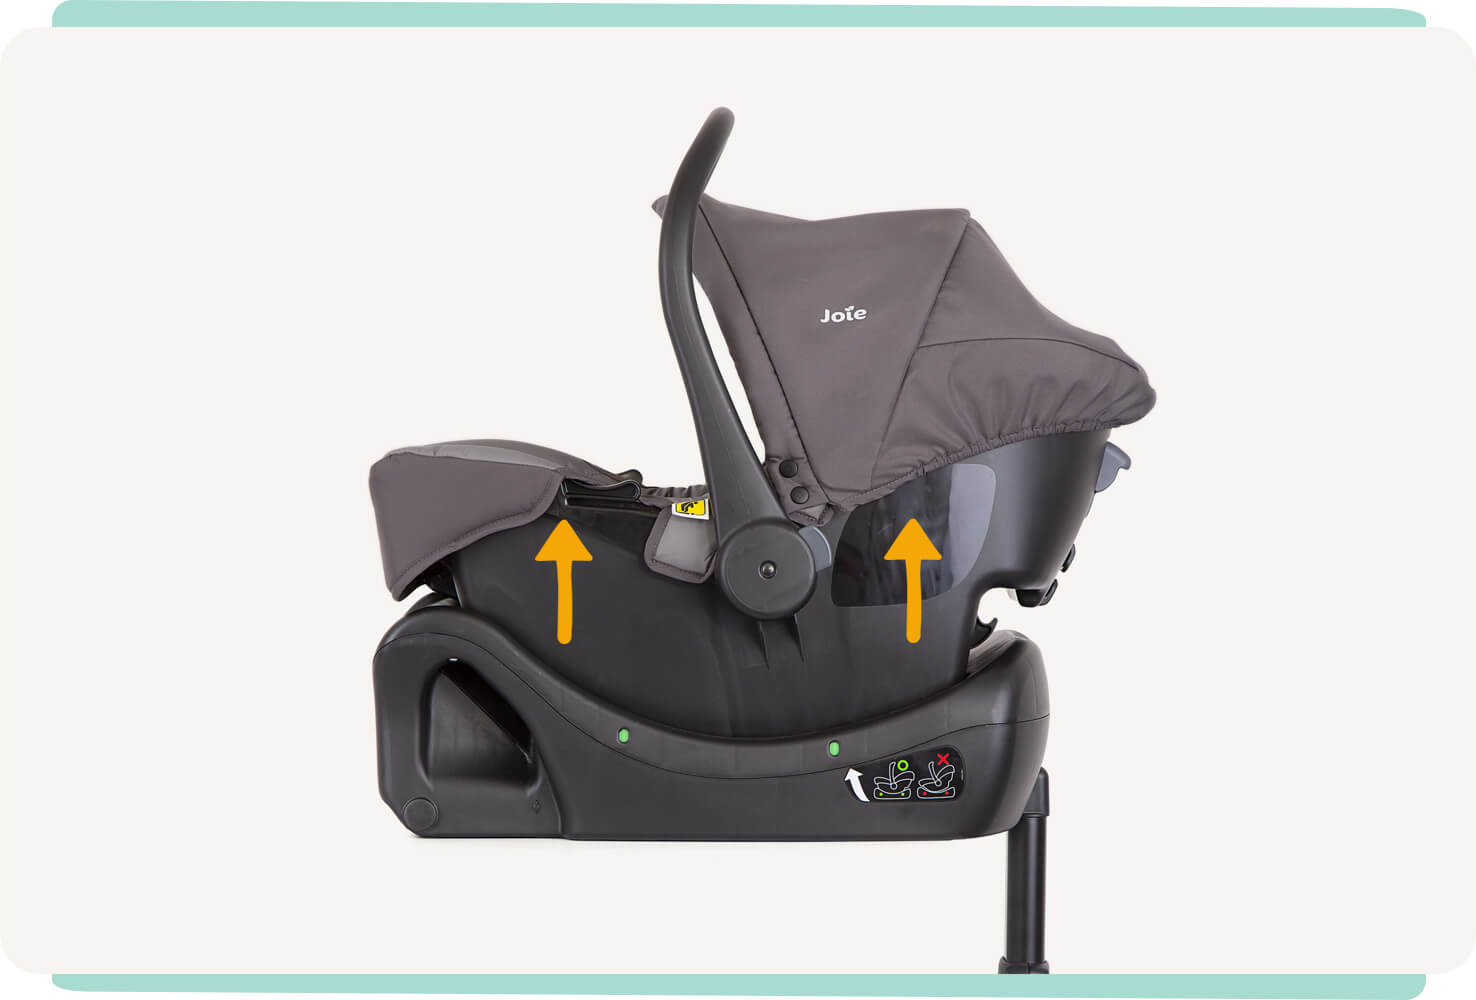   The Joie clickFIT child car seat base in profile, with an infant car seat installed on the base. Two orange arrows overlap the car seat, pointing up.